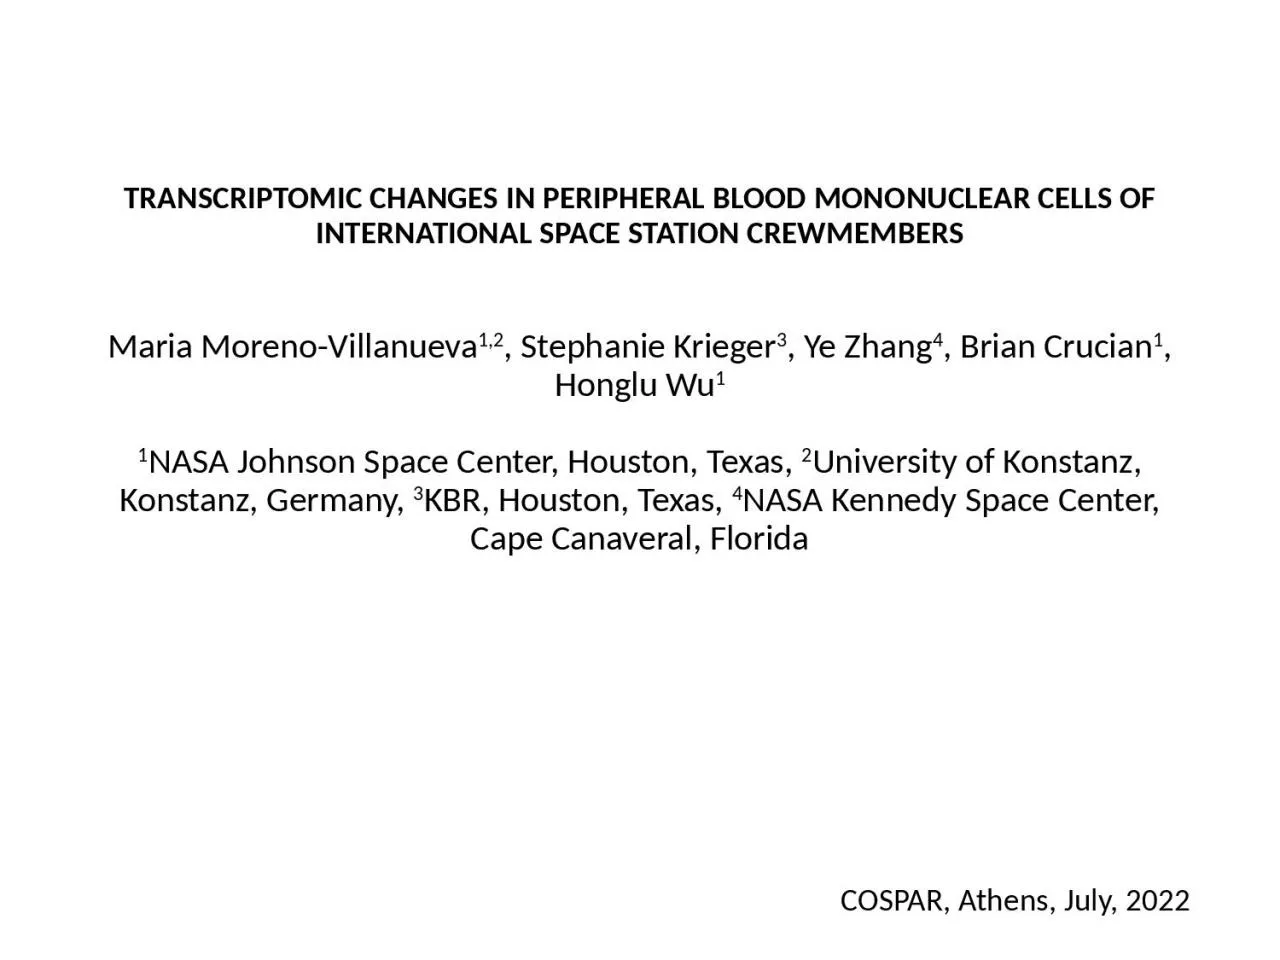 TRANSCRIPTOMIC CHANGES IN PERIPHERAL BLOOD MONONUCLEAR CELLS OF INTERNATIONAL SPACE STATION